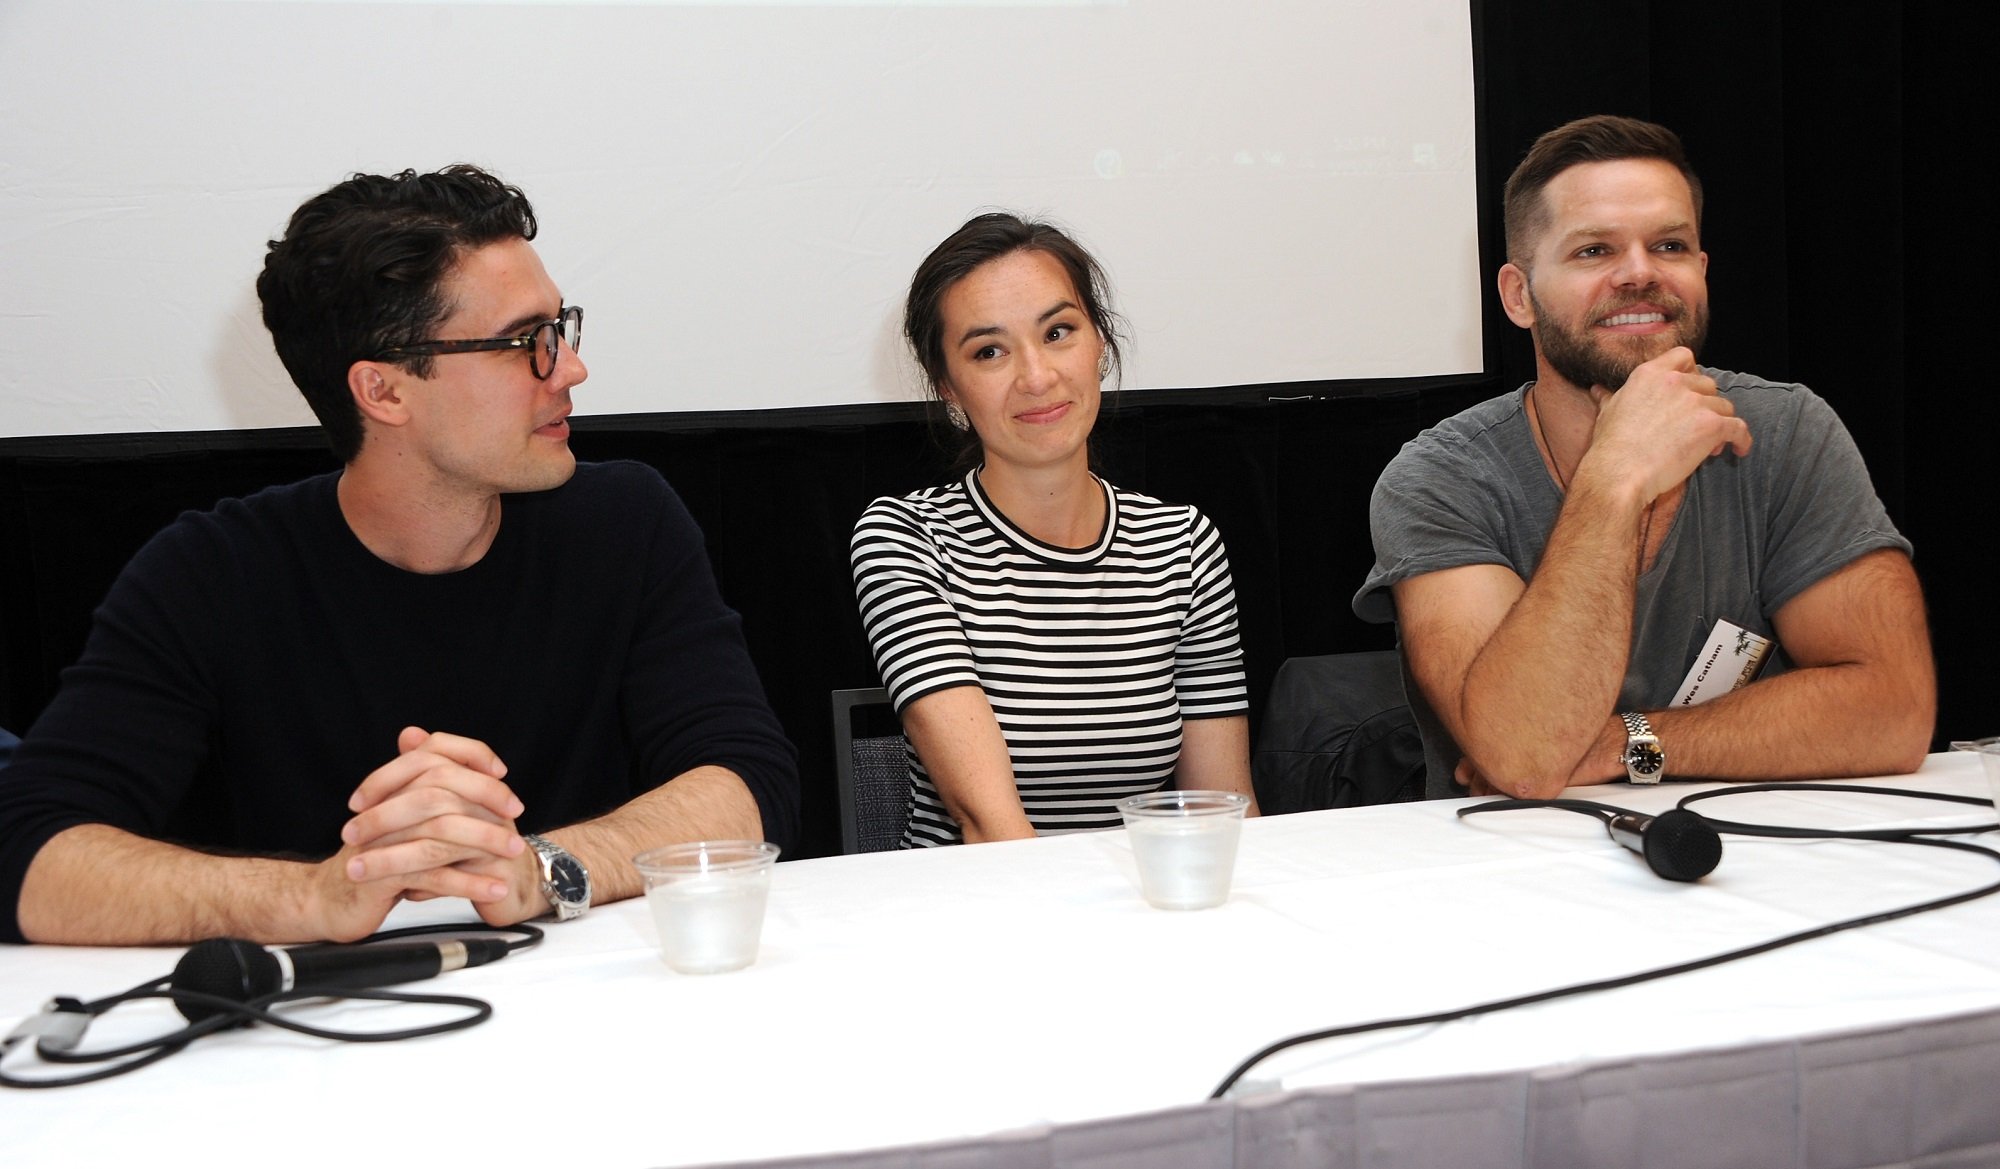 Steven Strait, Cara Gee, and Wes Chatham of The Expanse